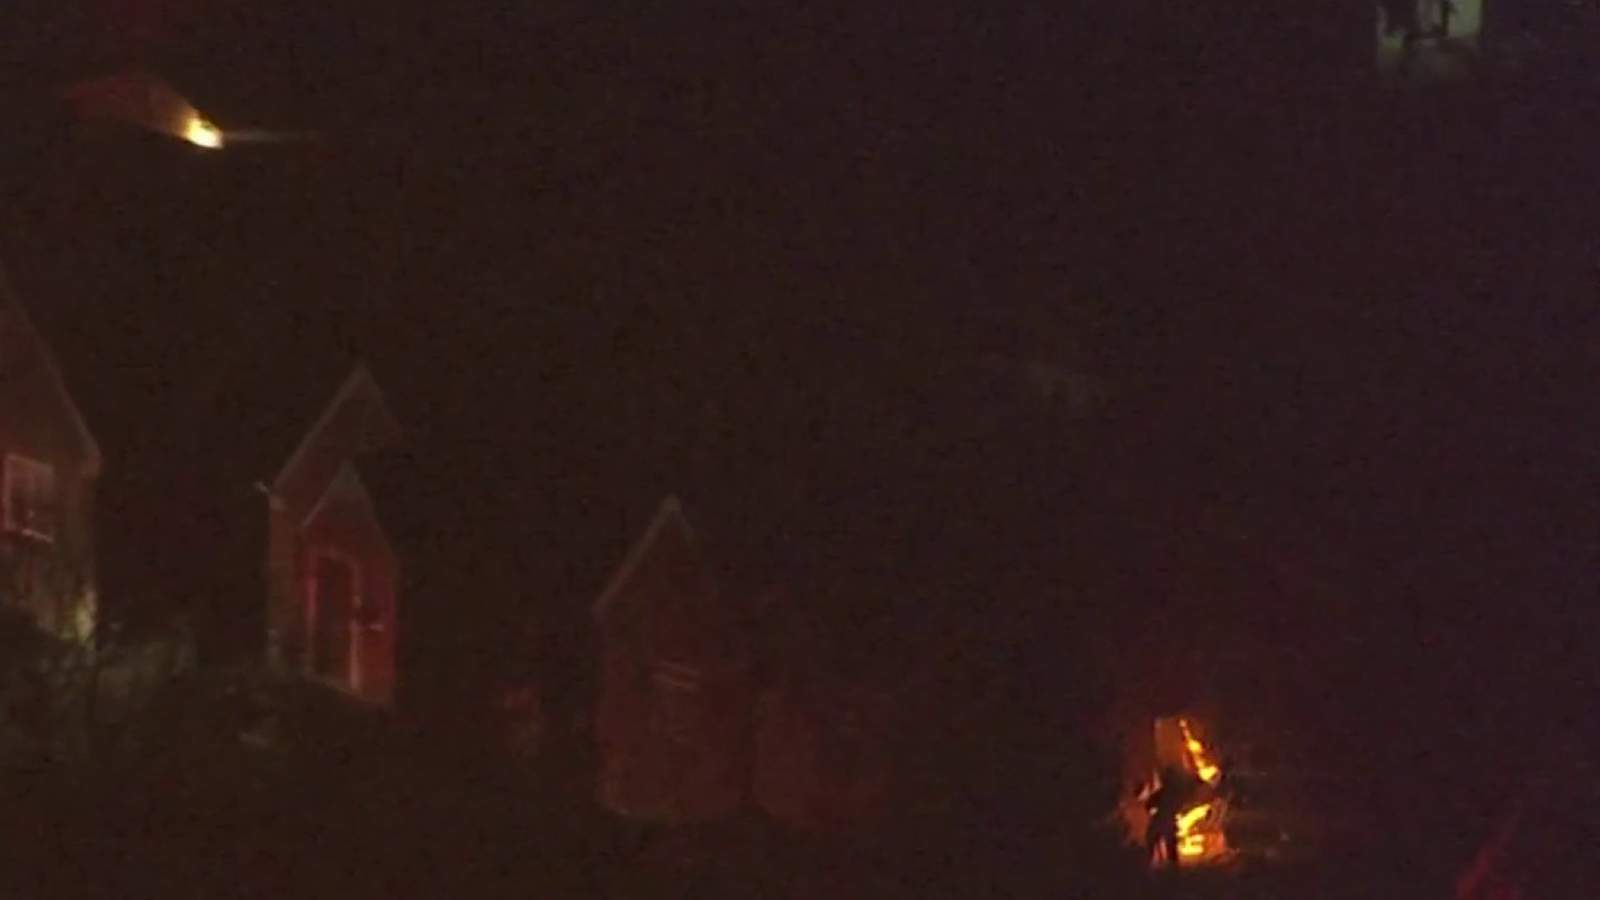 Authorities investigate house fire on Detroit’s east side